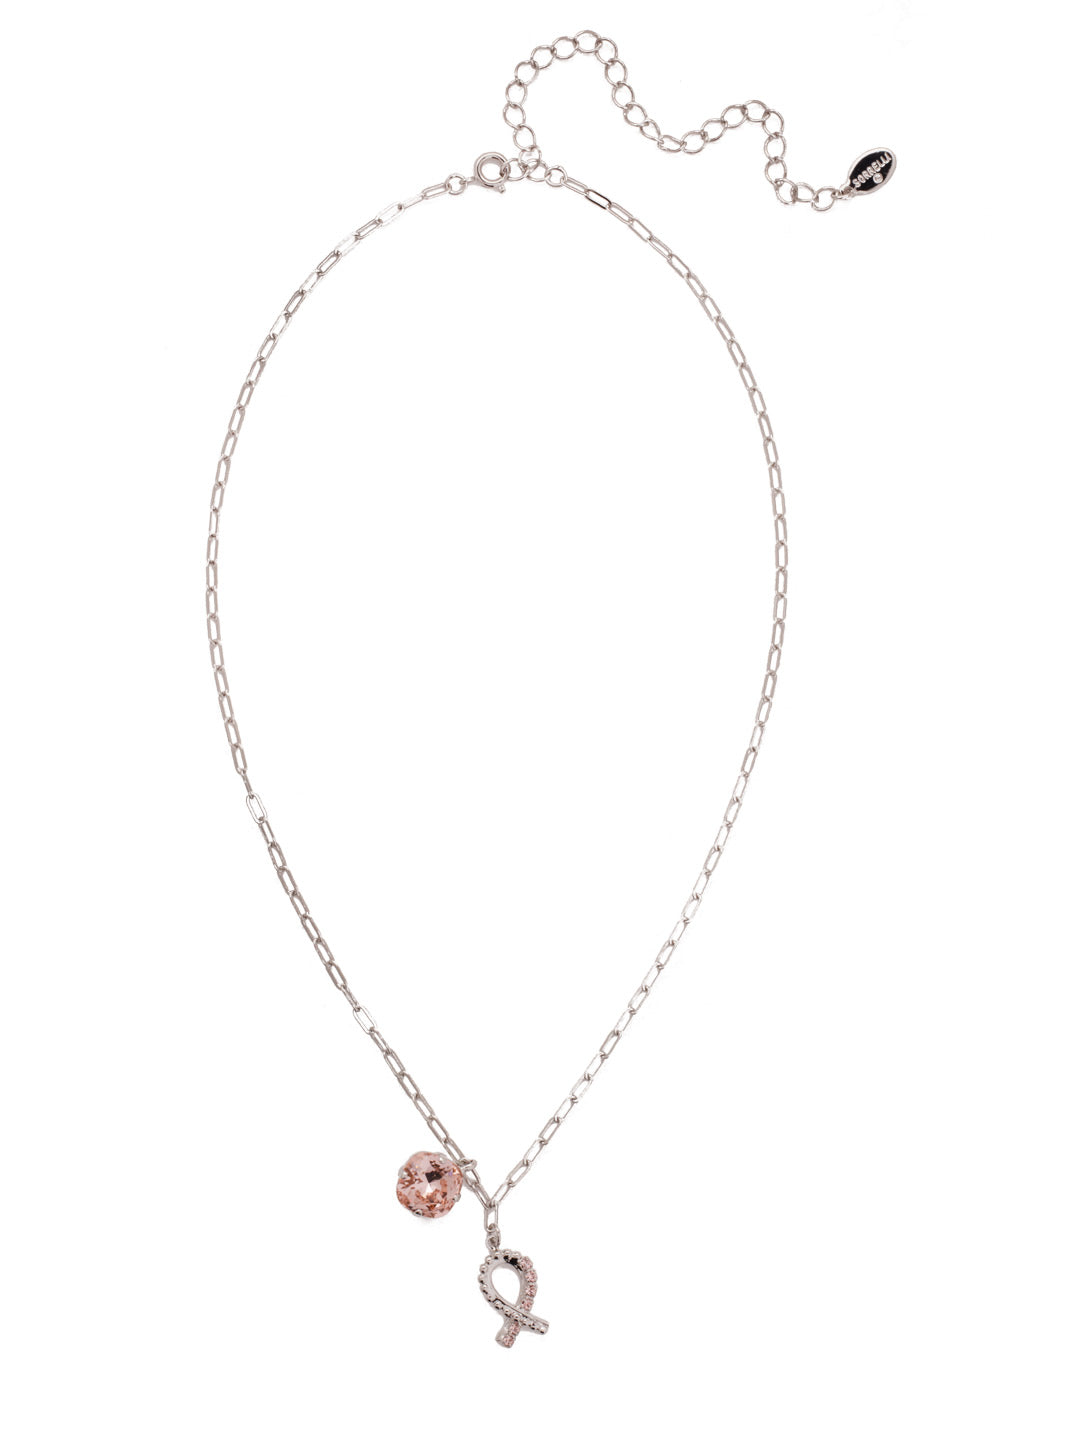 Crystal Ribbon Pendant Necklace - NEV201PDVIN - <p>The Crystal Ribbon Pendant Necklace is created and inspired by the Breast Cancer Awareness ribbon and all the warriors who wear it. Delicate crystals line a metal ribbon, creating a meaningful statement. From Sorrelli's Vintage Rose collection in our Palladium finish.</p>